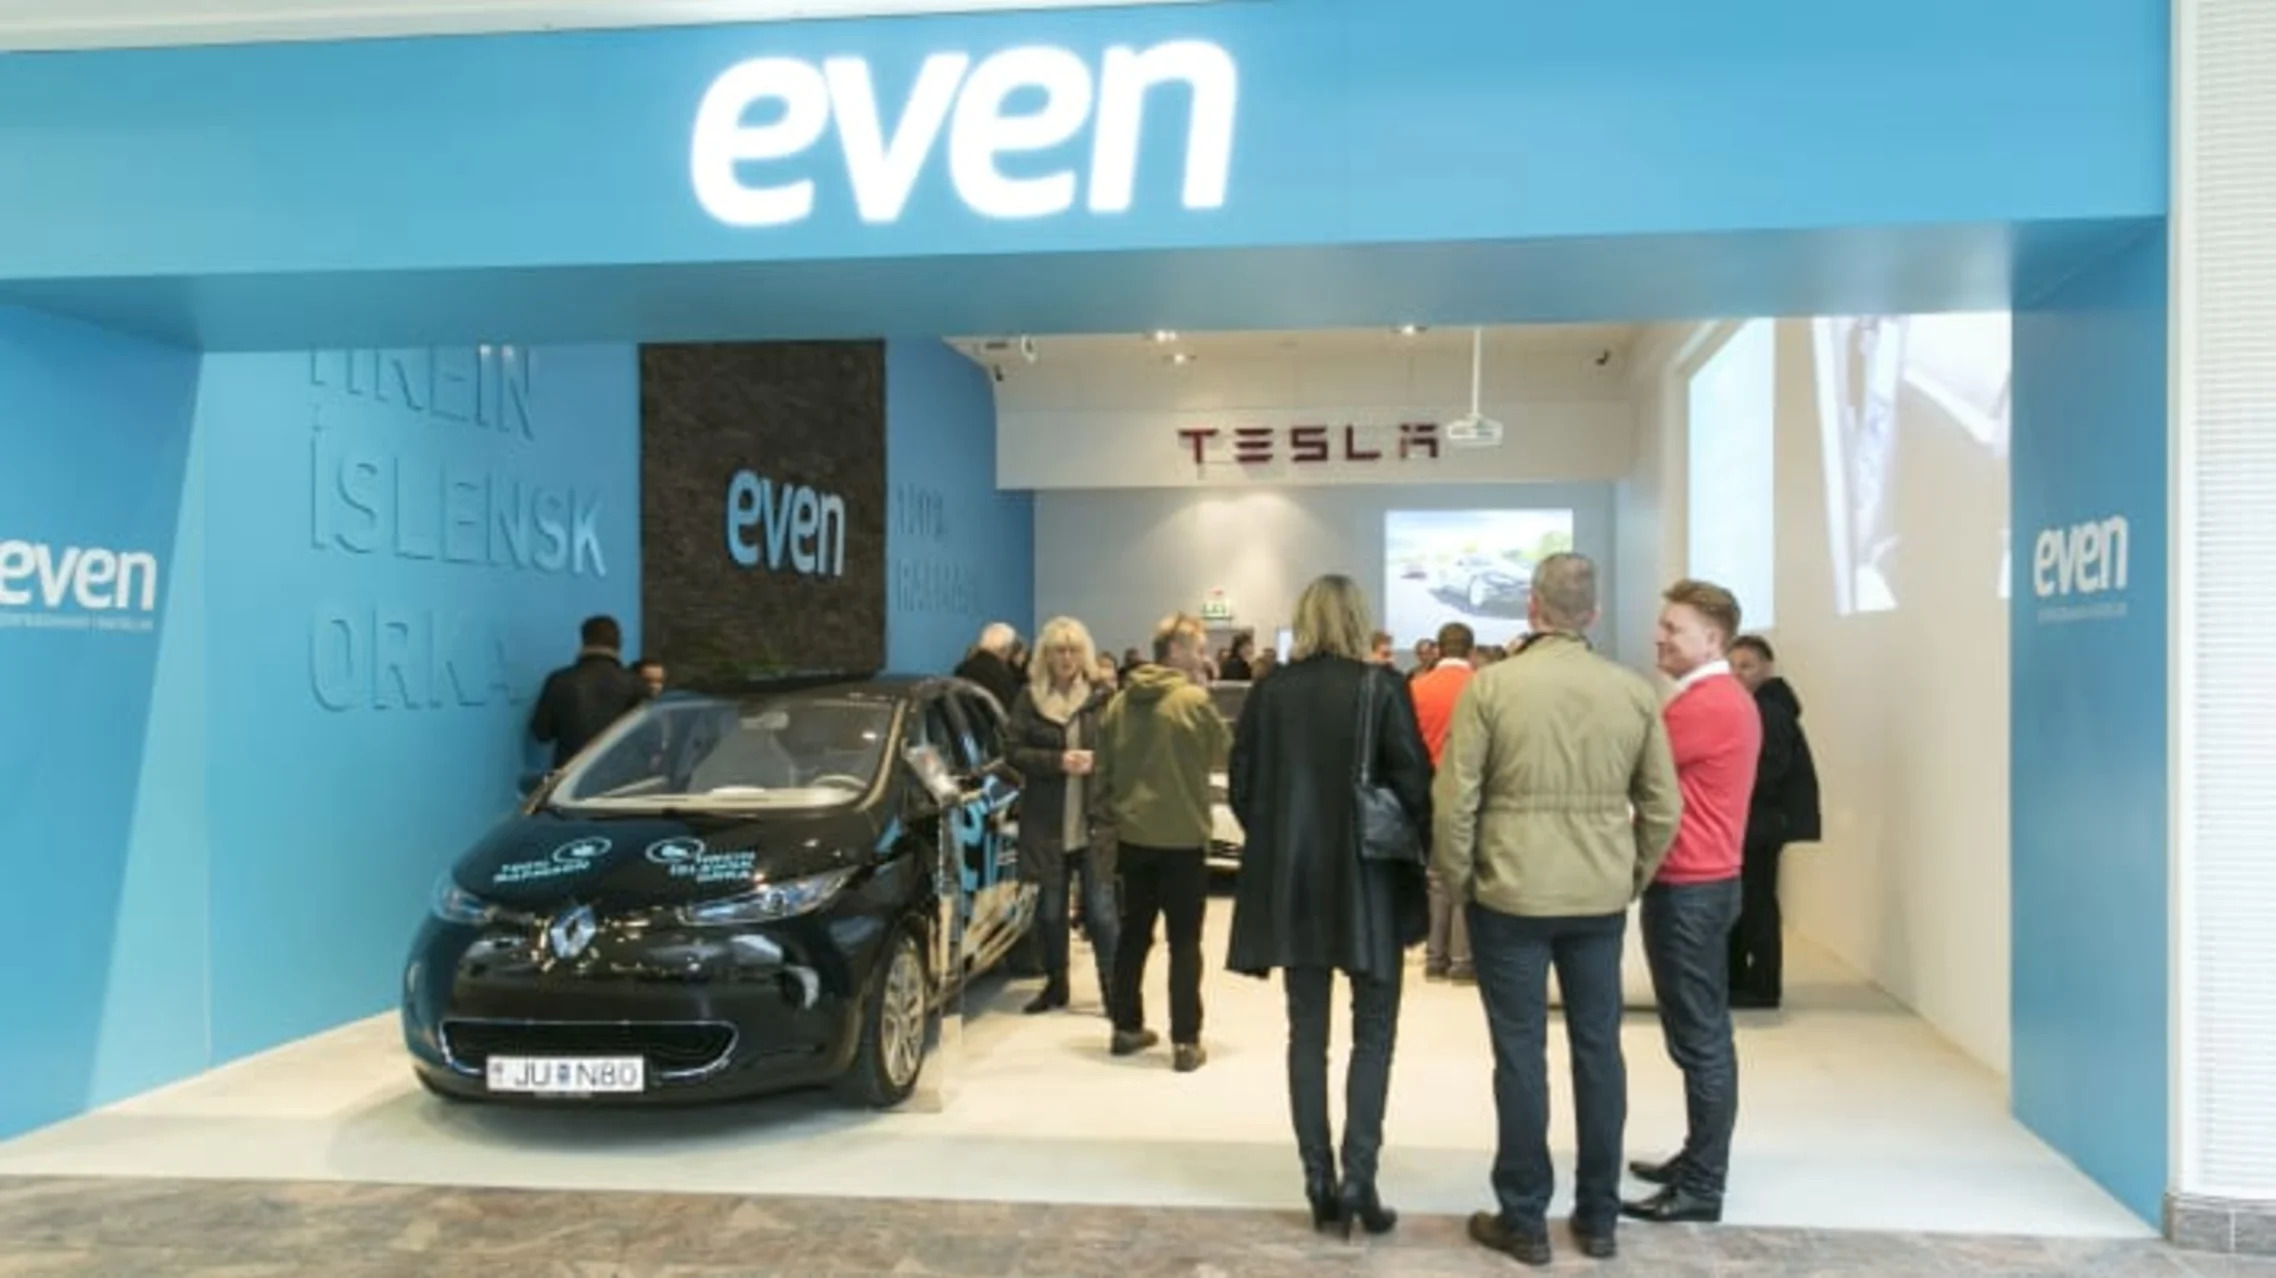 EVEN Electric store in Iceland